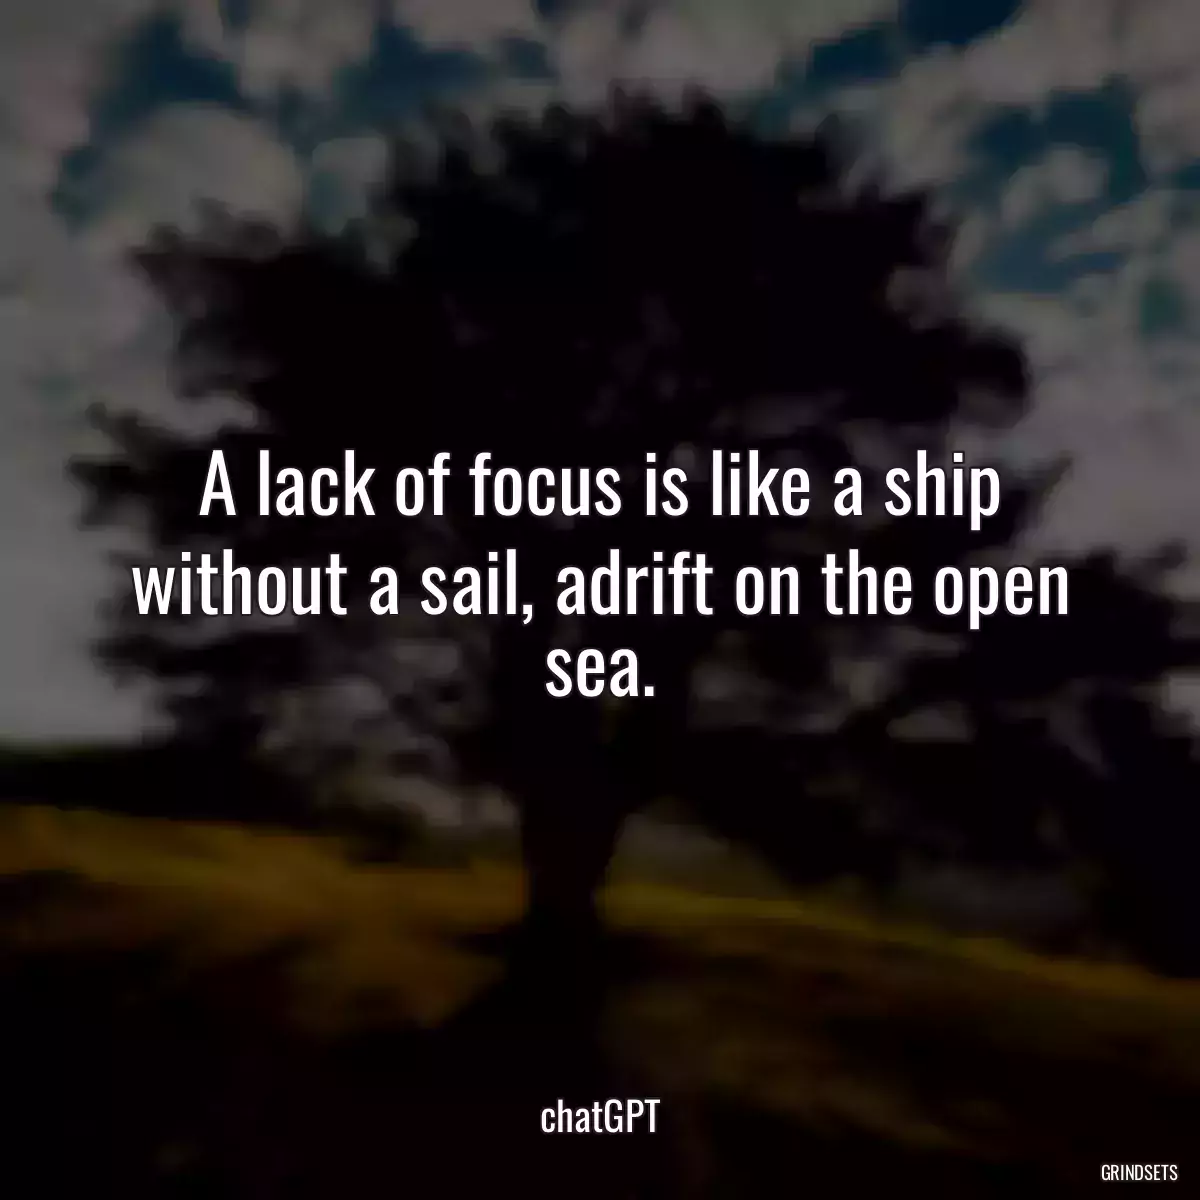 A lack of focus is like a ship without a sail, adrift on the open sea.